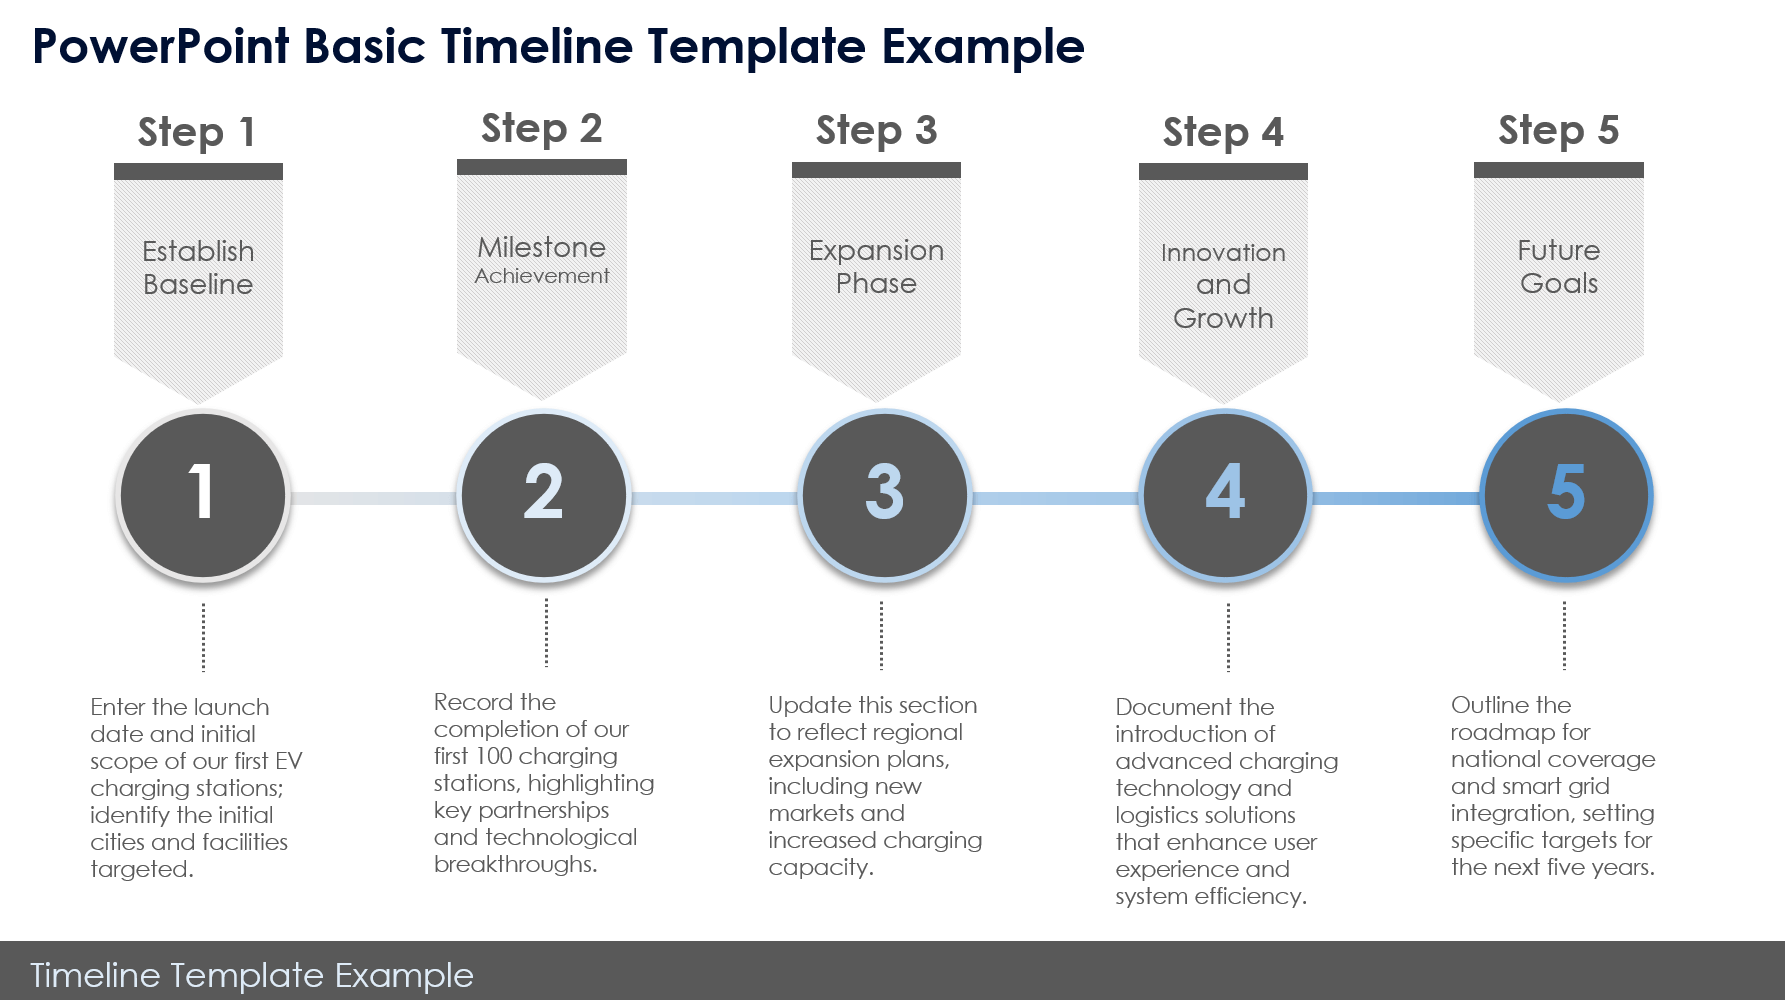 PowerPoint Basic Timeline Template Example